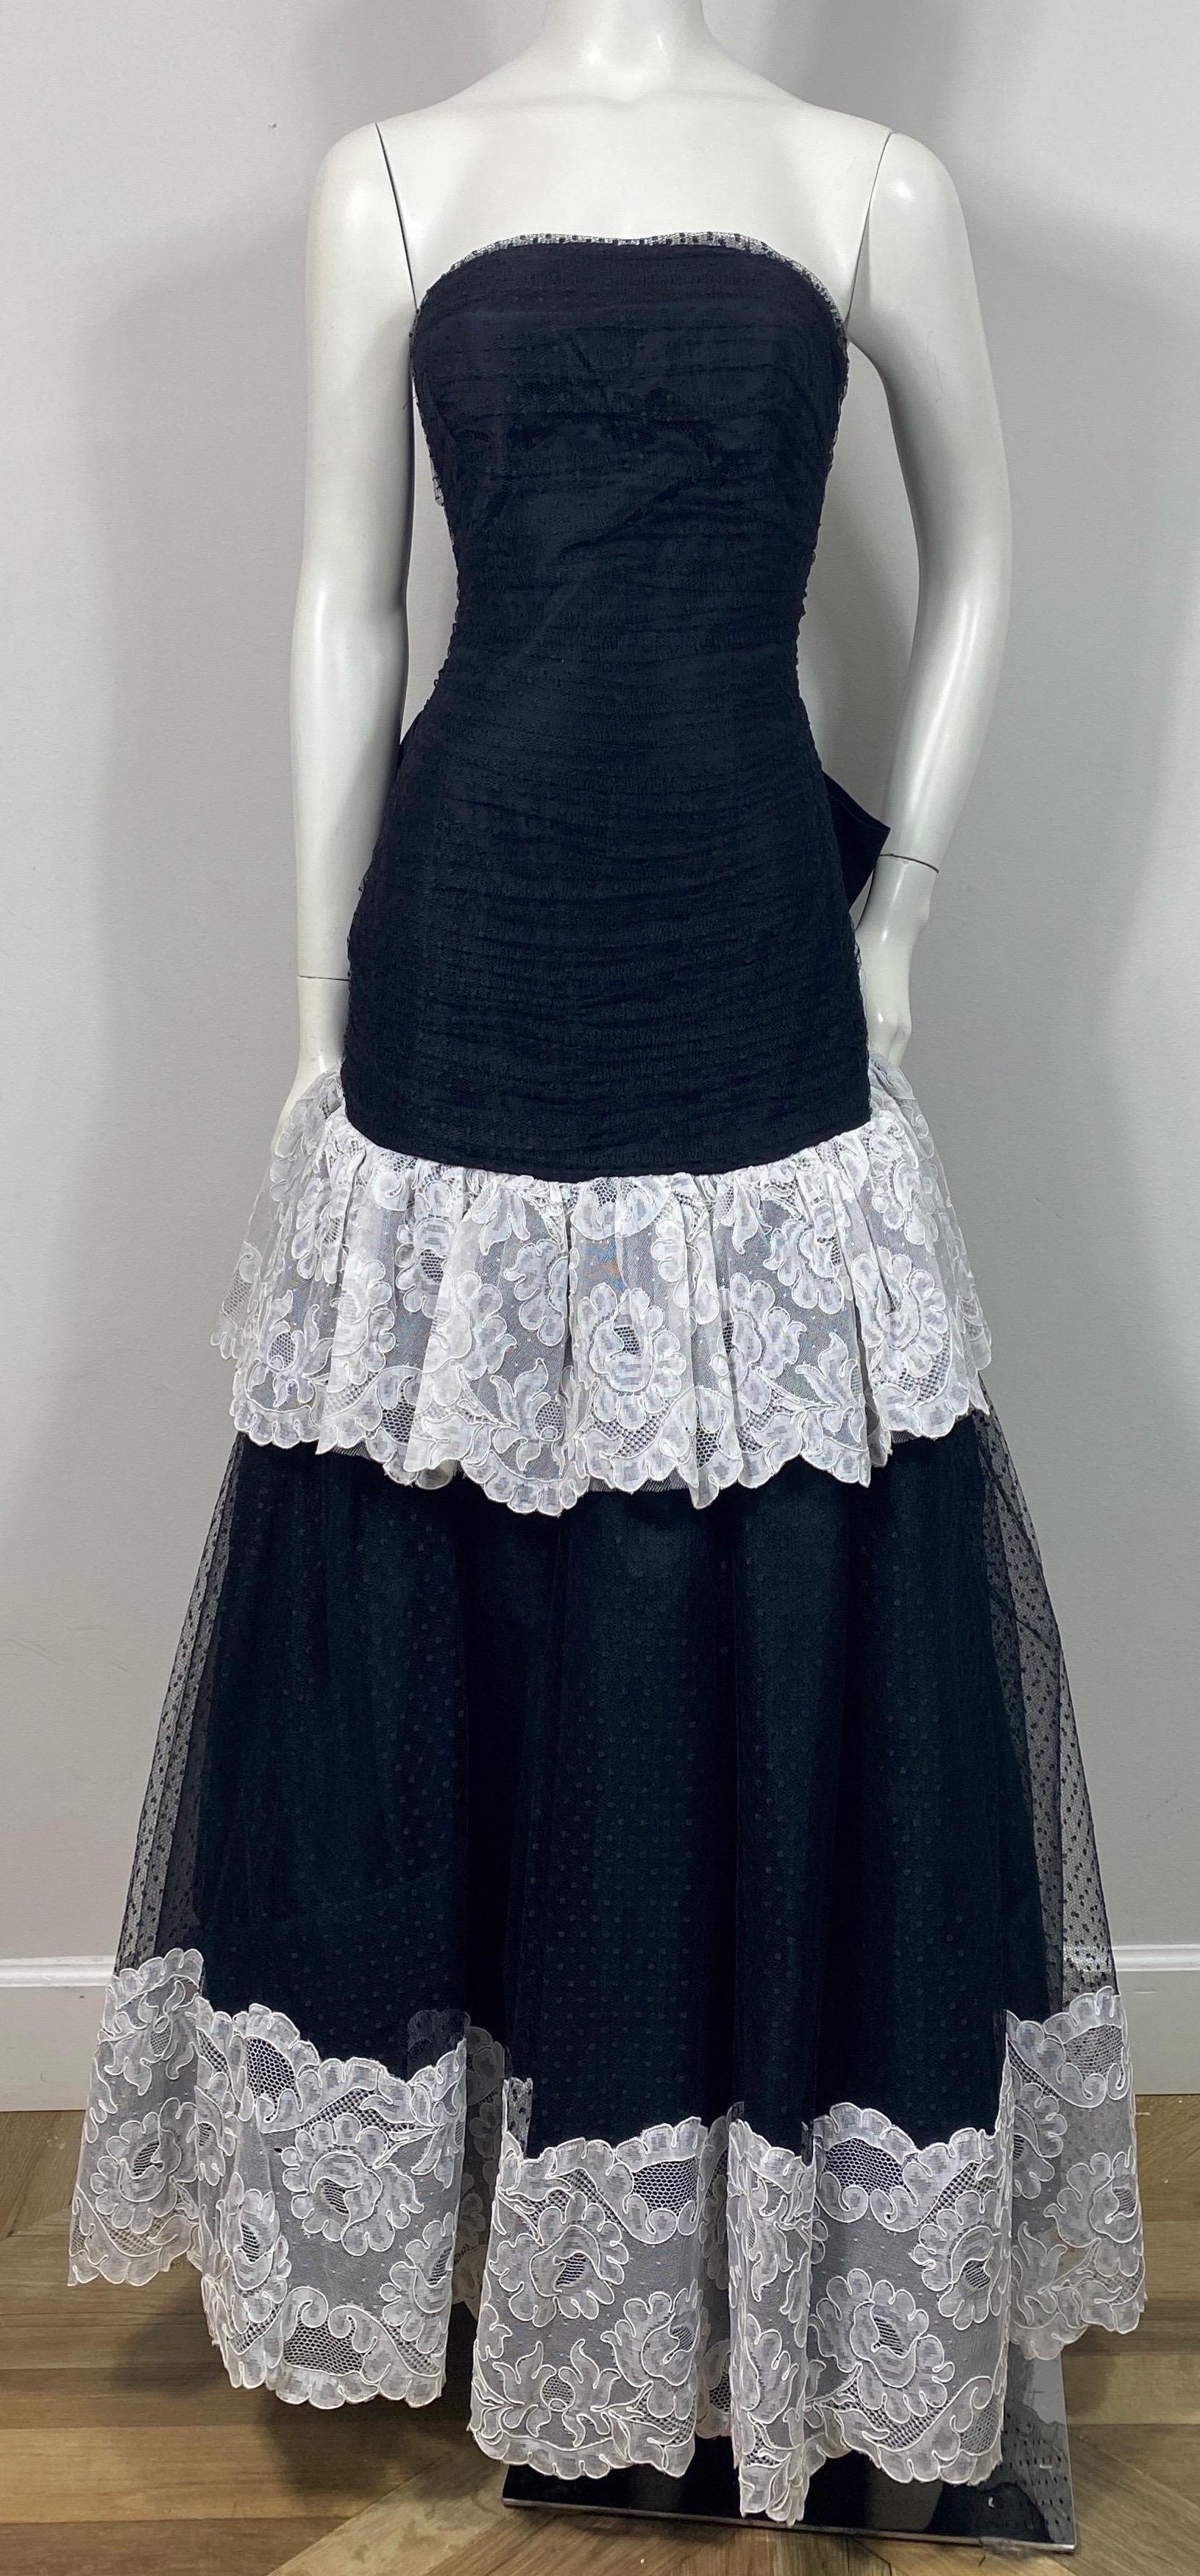 Bellville Sassoon Late 1980’s Black and White Point D’Esprit Gown - Size 8  This late 80’s early 90’s vintage gown is made of a black point d’esprit that is trimmed in white lace. The top of the strapless gown has a ruched bodice that is fitted